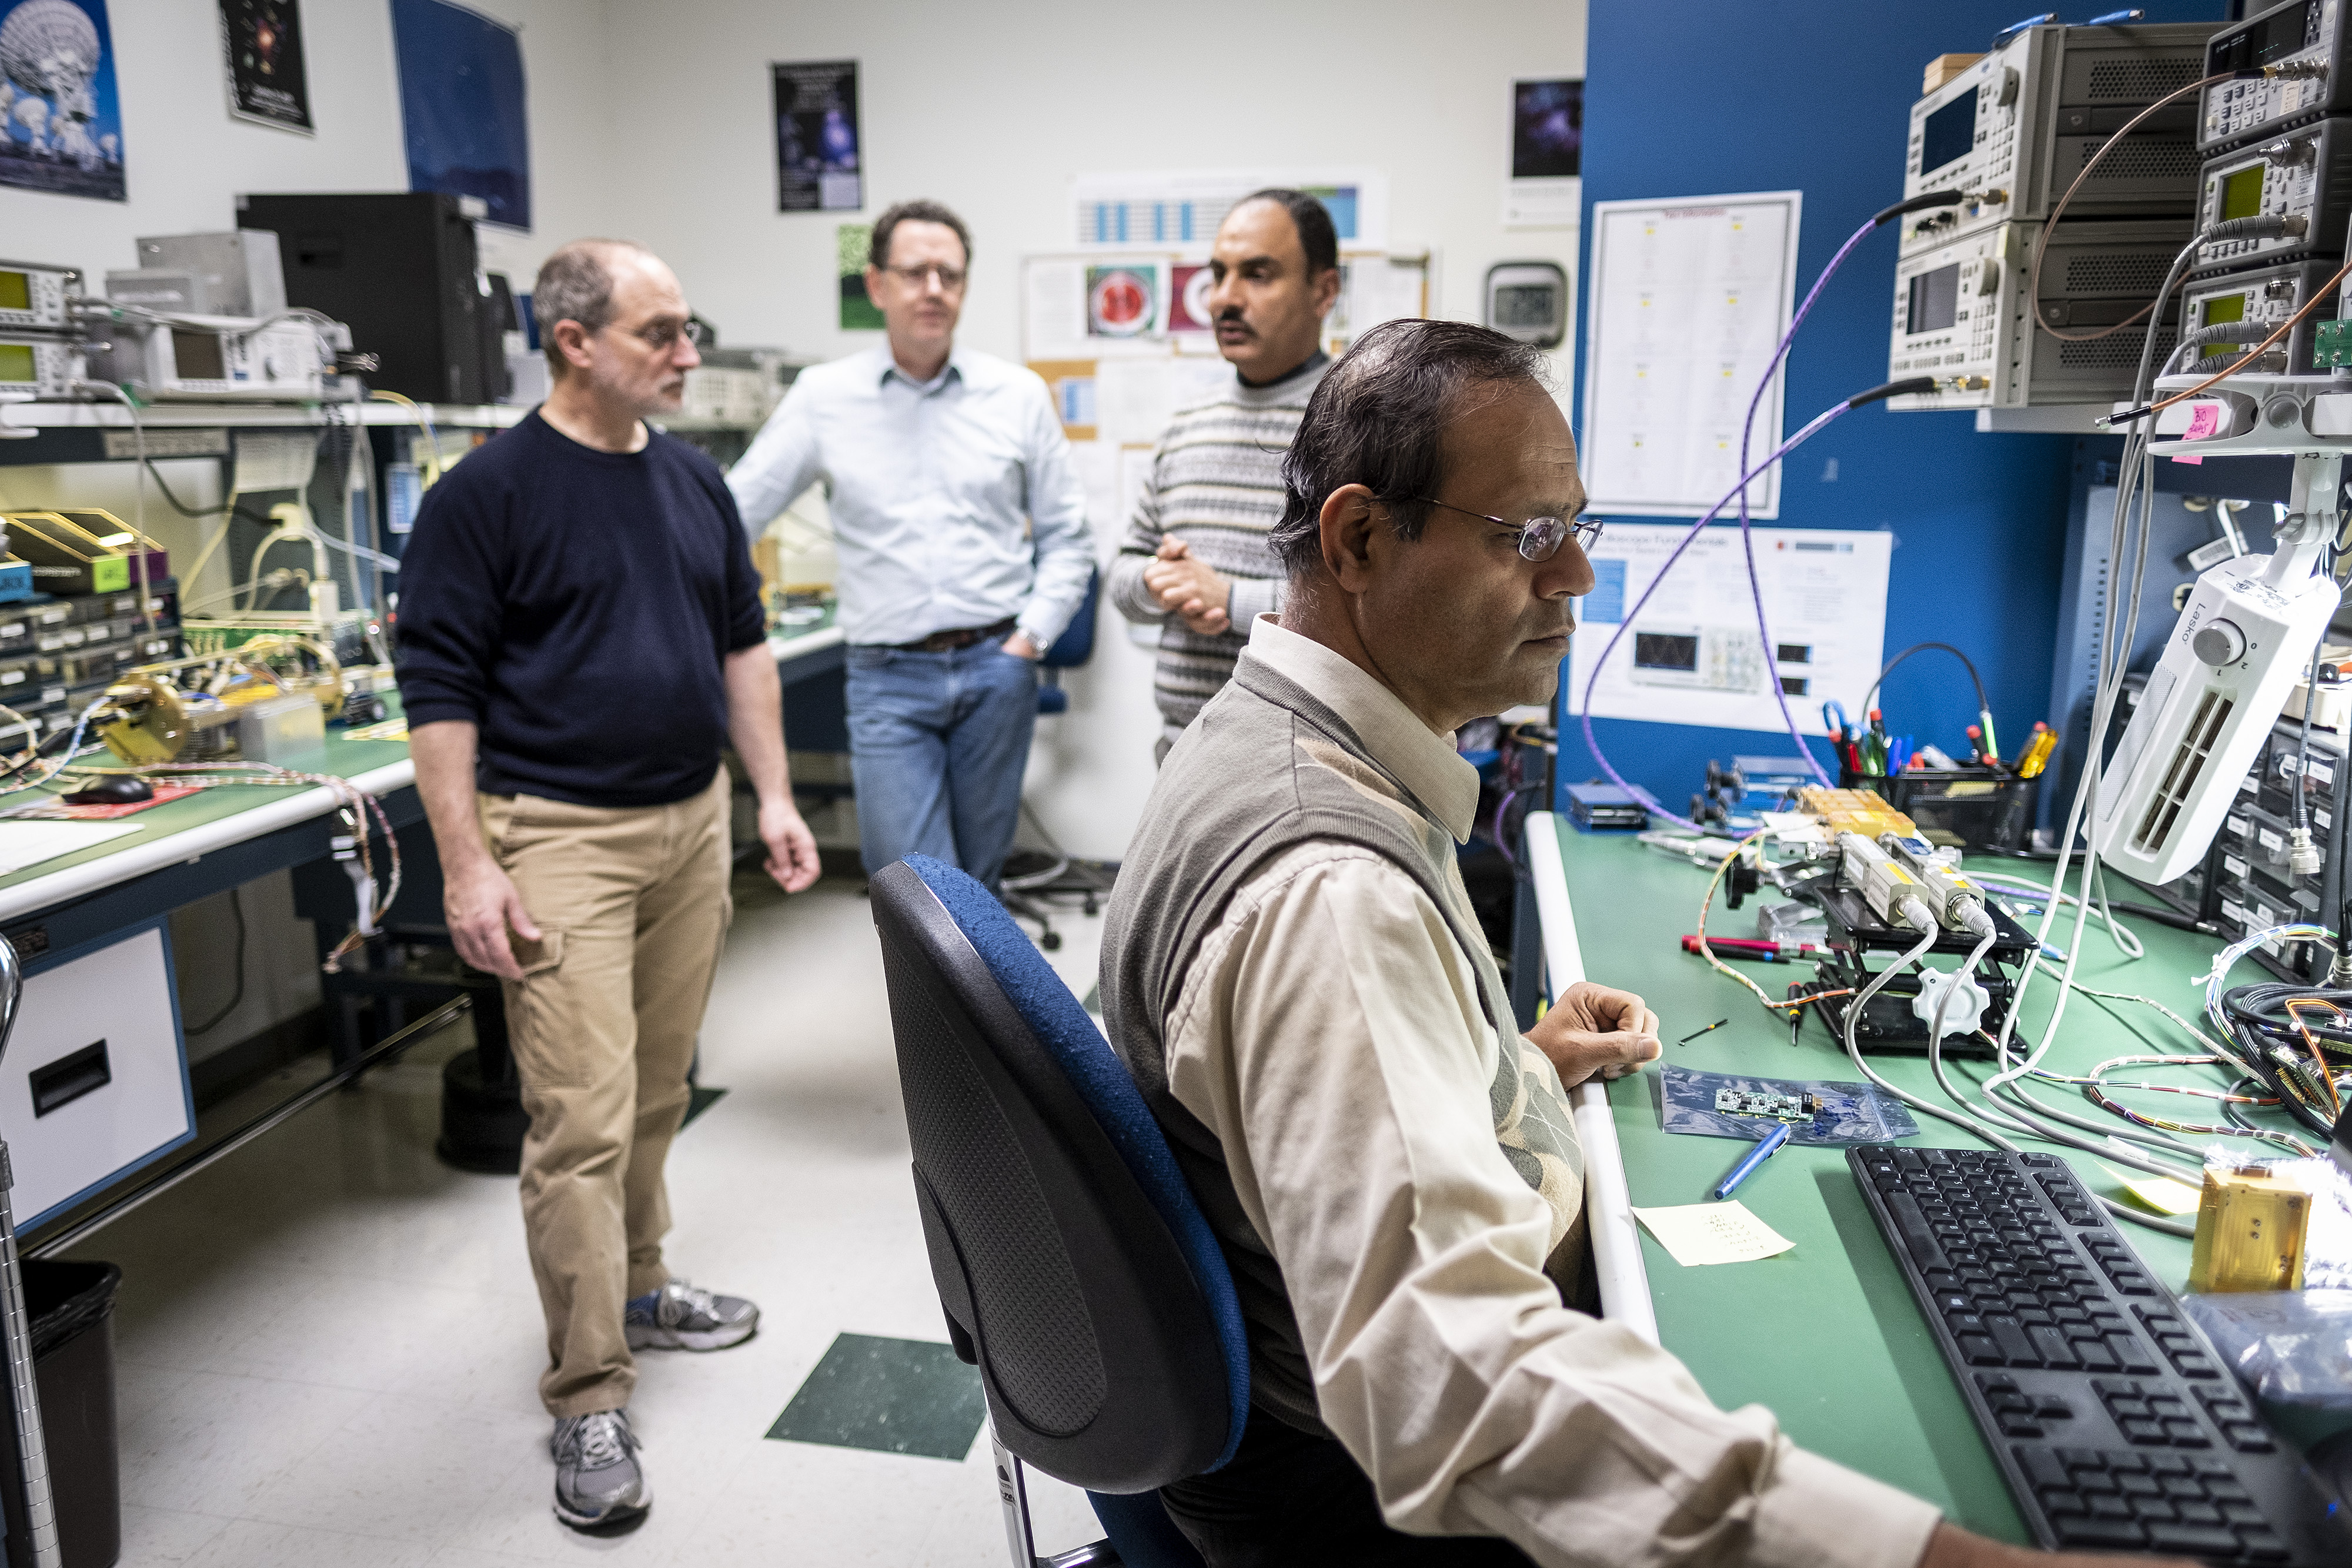 Four scientists converse in a lab